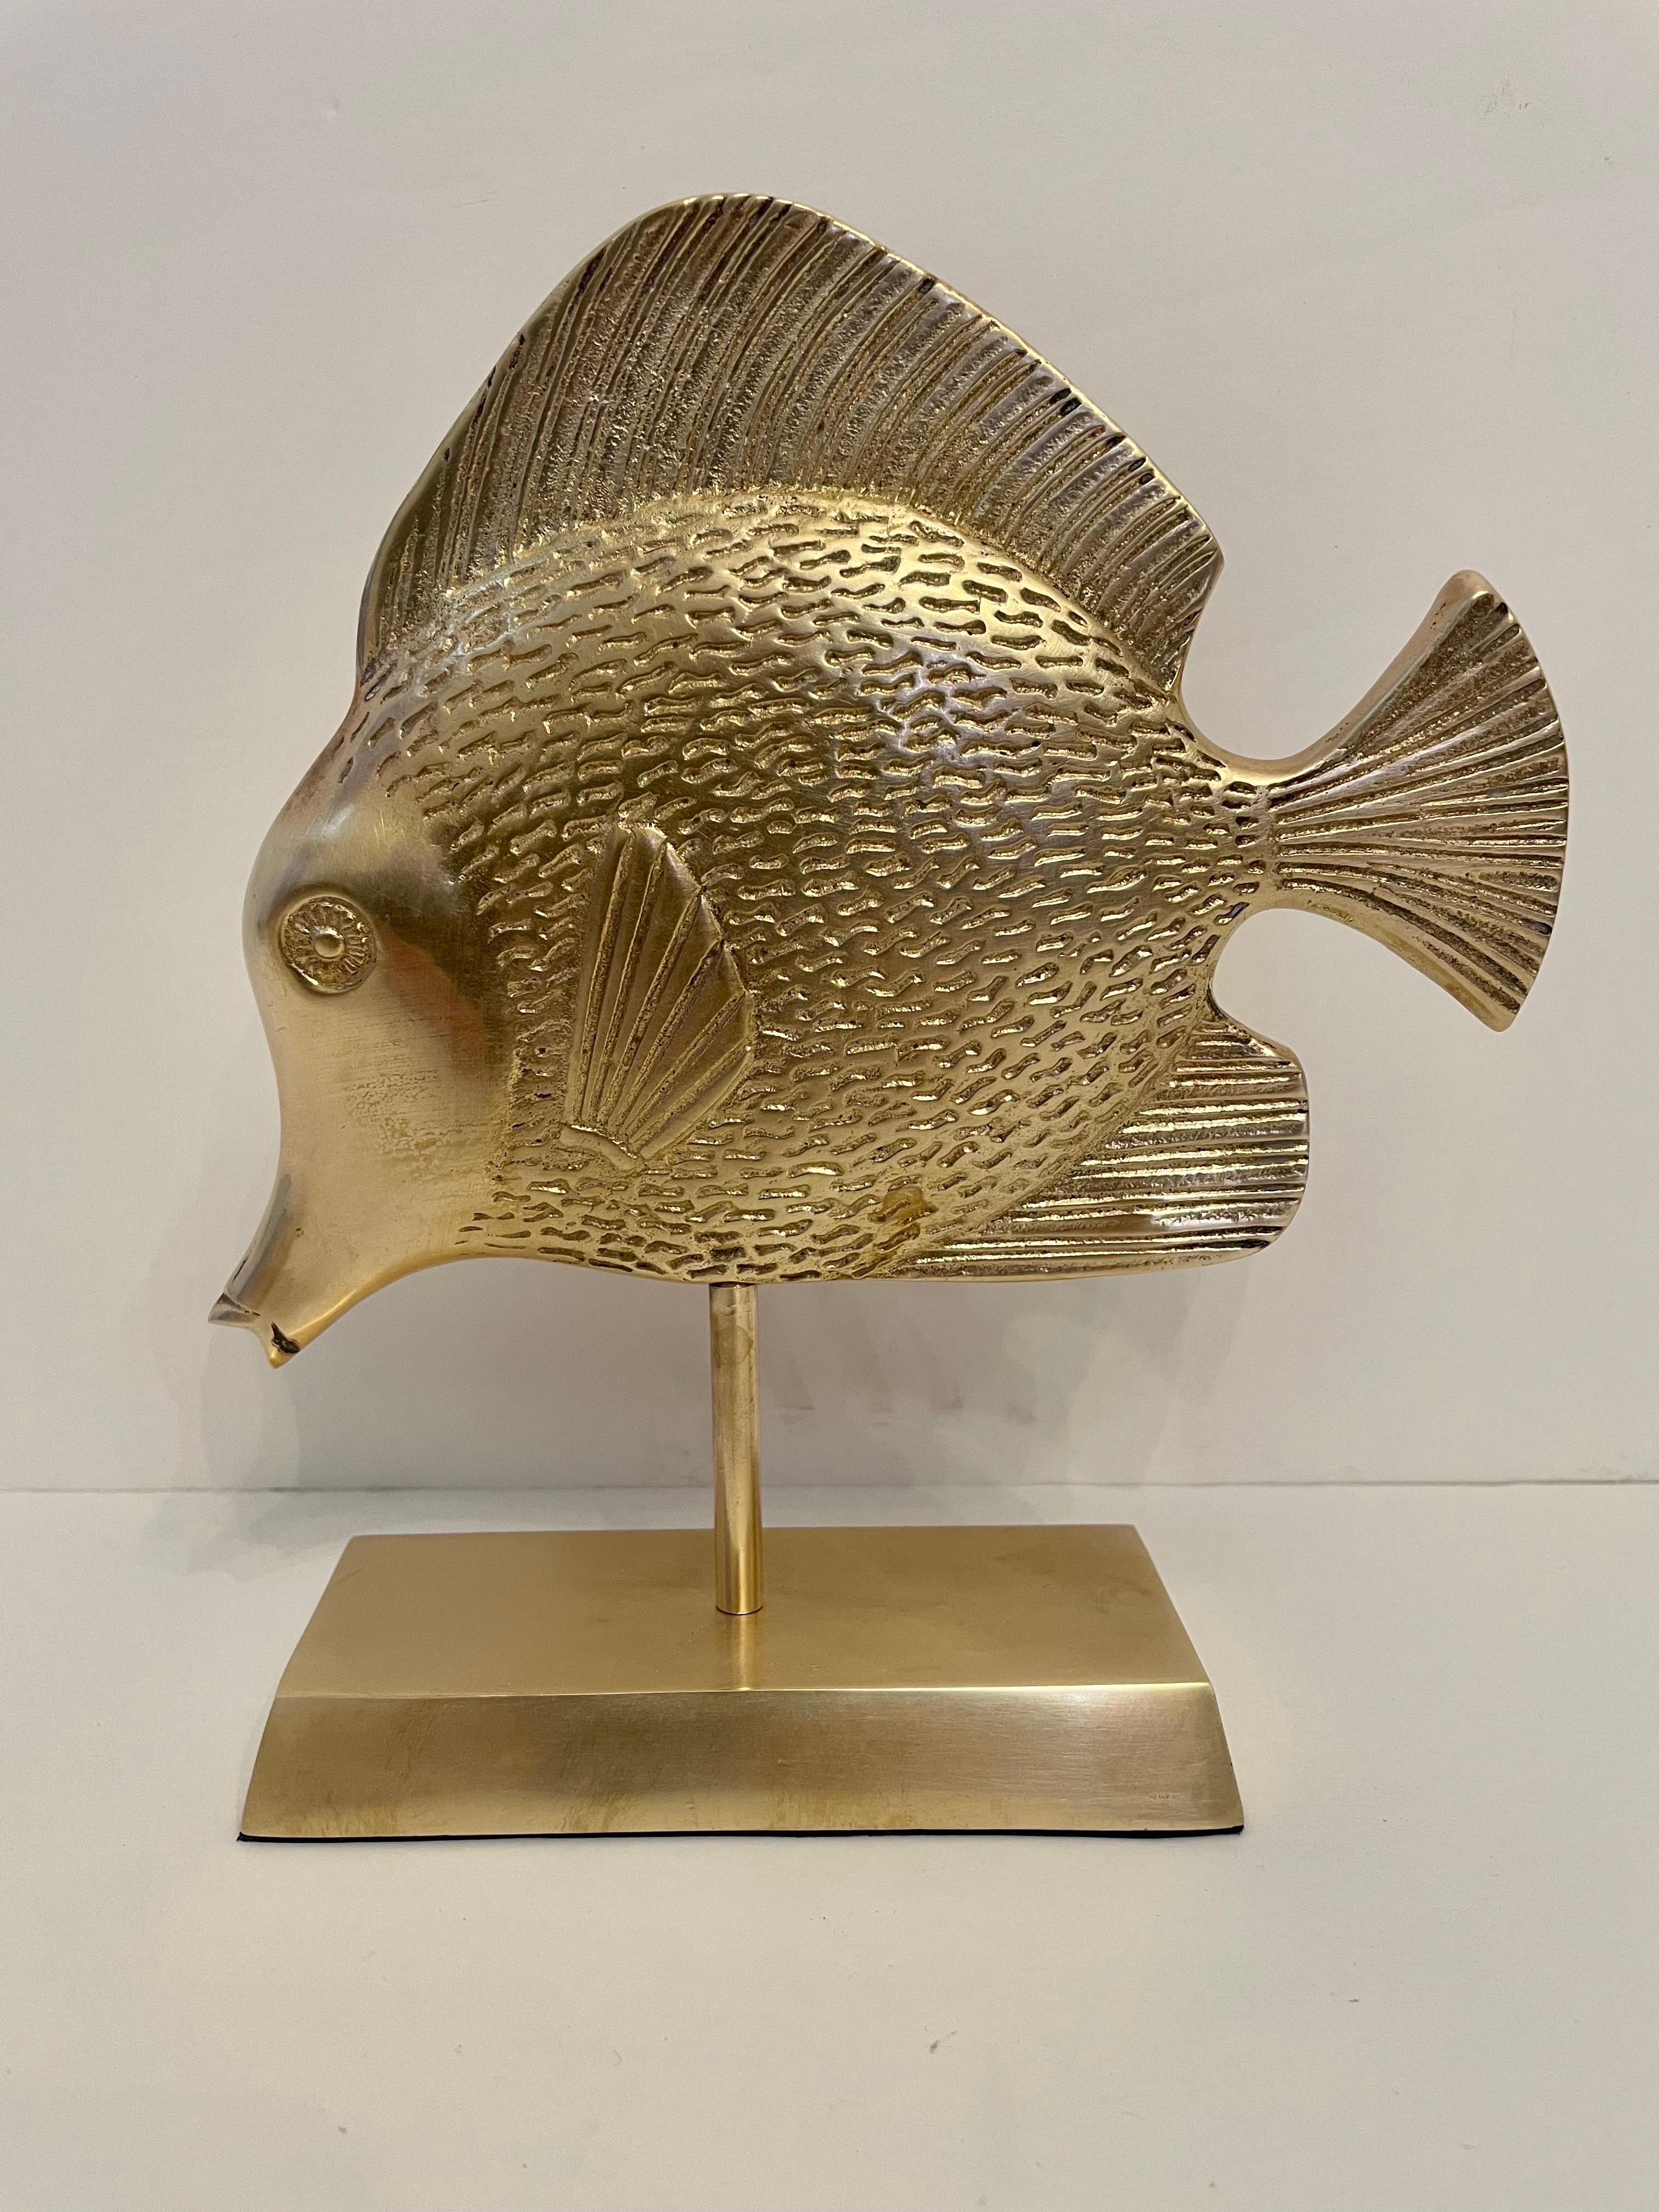 Brass Tropical tang fish sculpture on brass stand. Rubbery felt on bottom of base. Overall good condition. Dark and light spots in photos is reflection. Will look great on desk or bookcase.